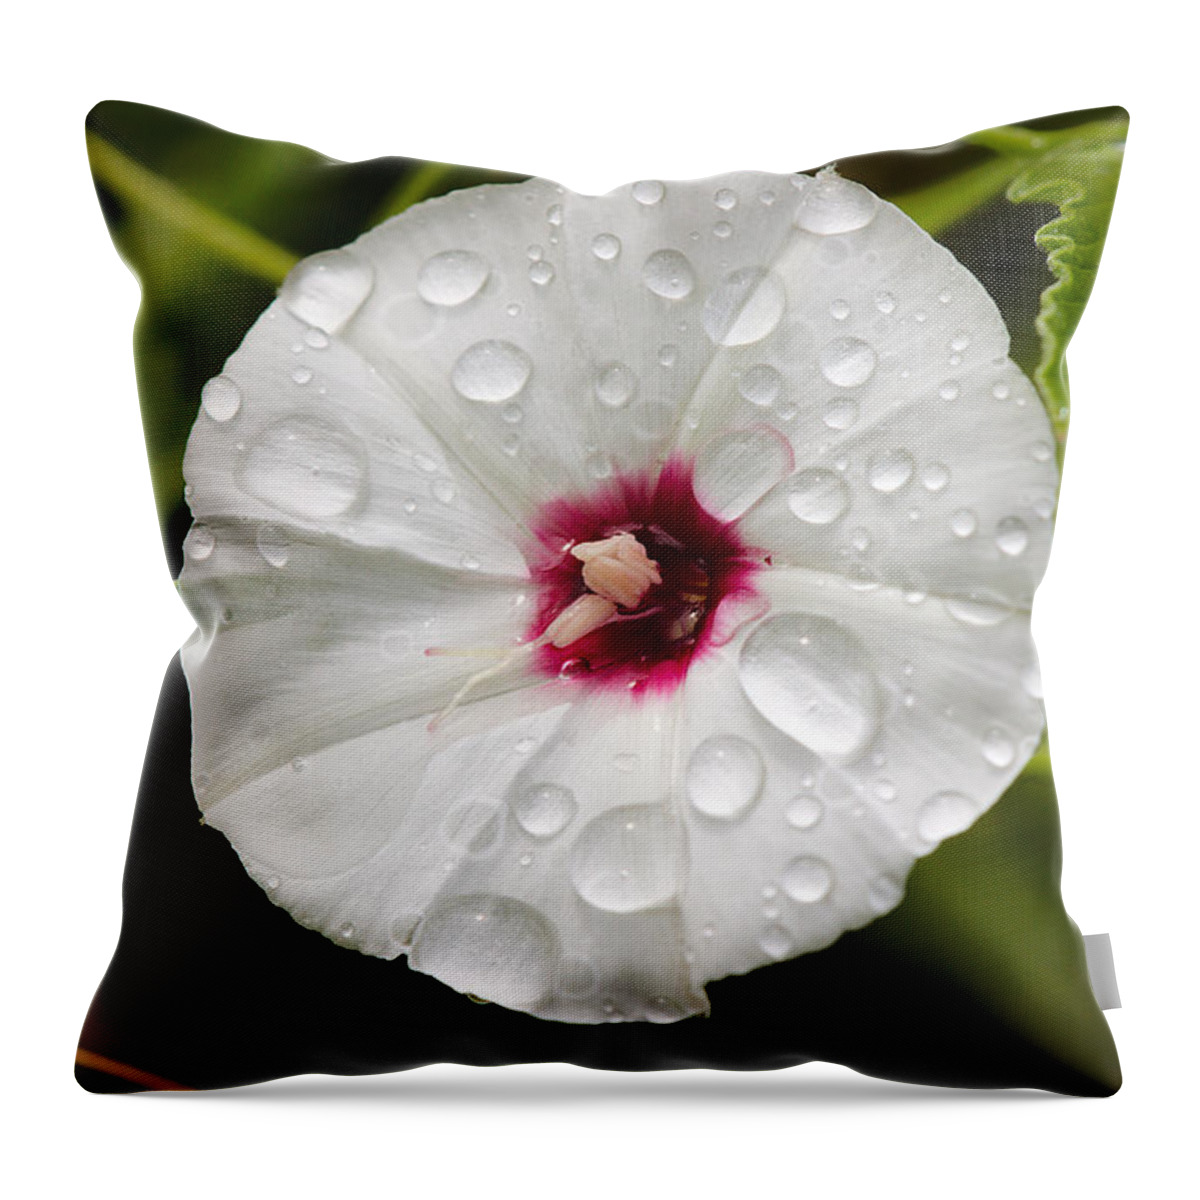 James Smullins Throw Pillow featuring the photograph Morning bath by James Smullins